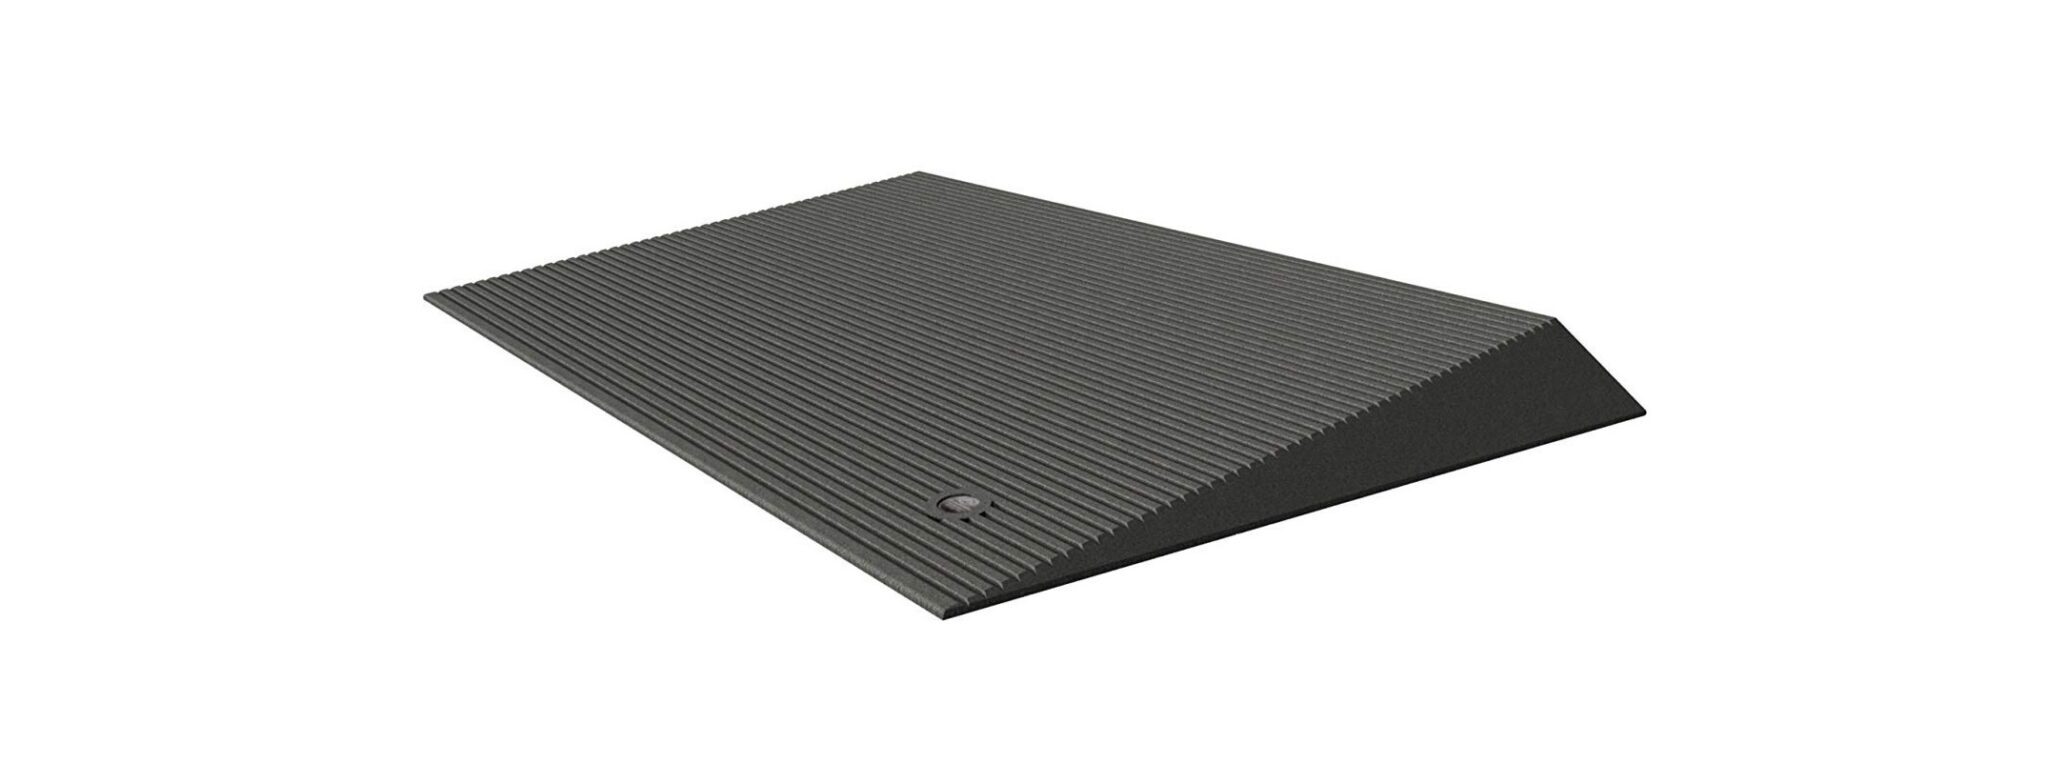 TAEM 1.5-1 Transitions Angled Entry Mat